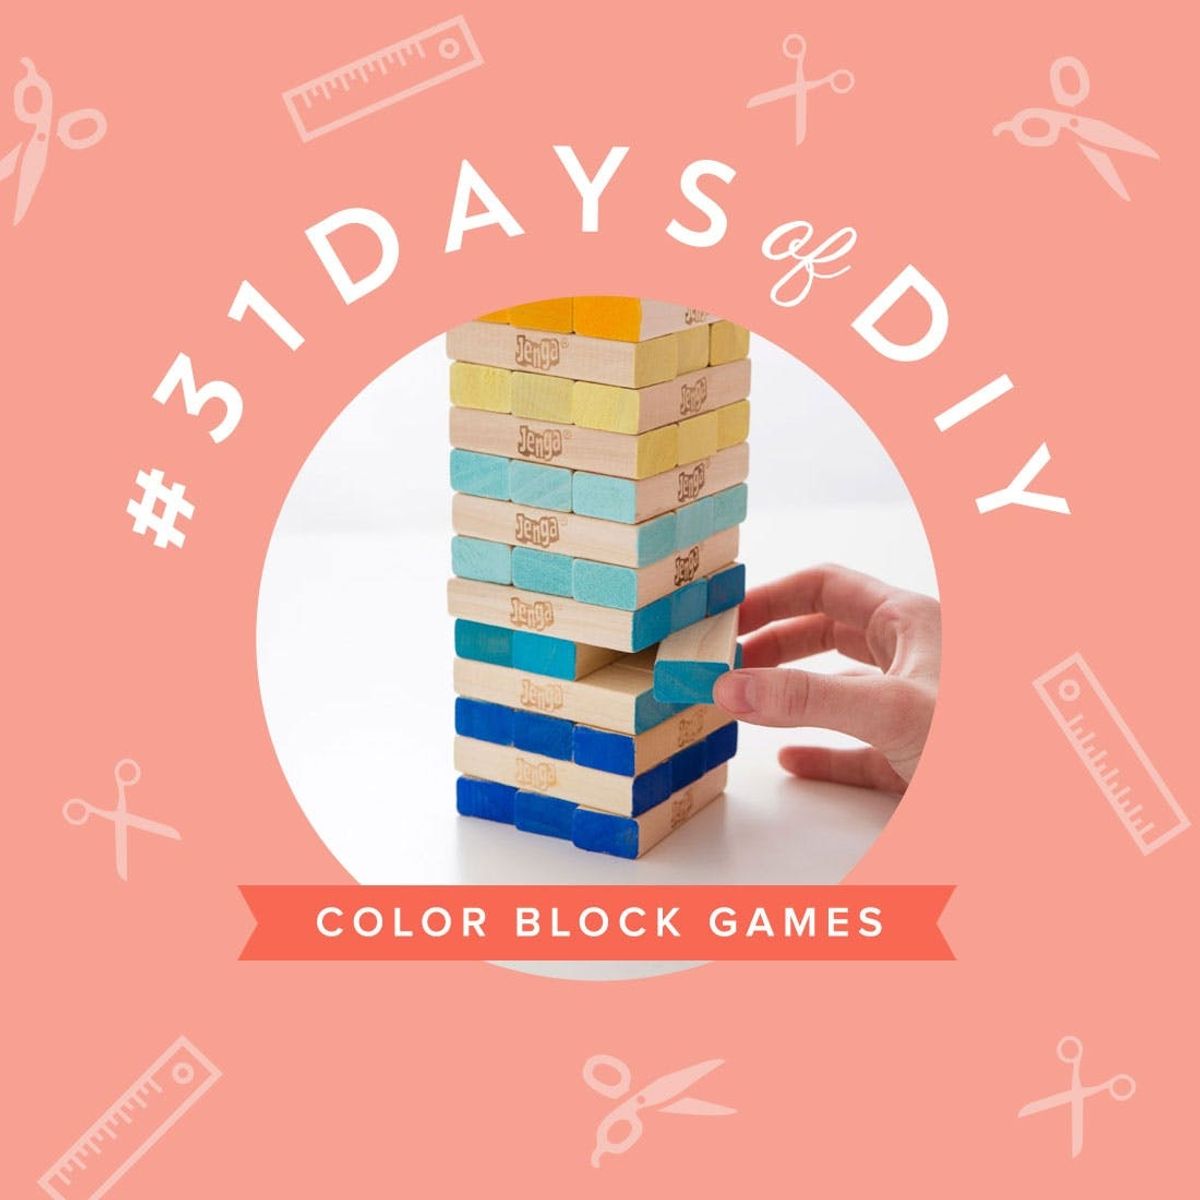 Win Game Night With Color Block Games